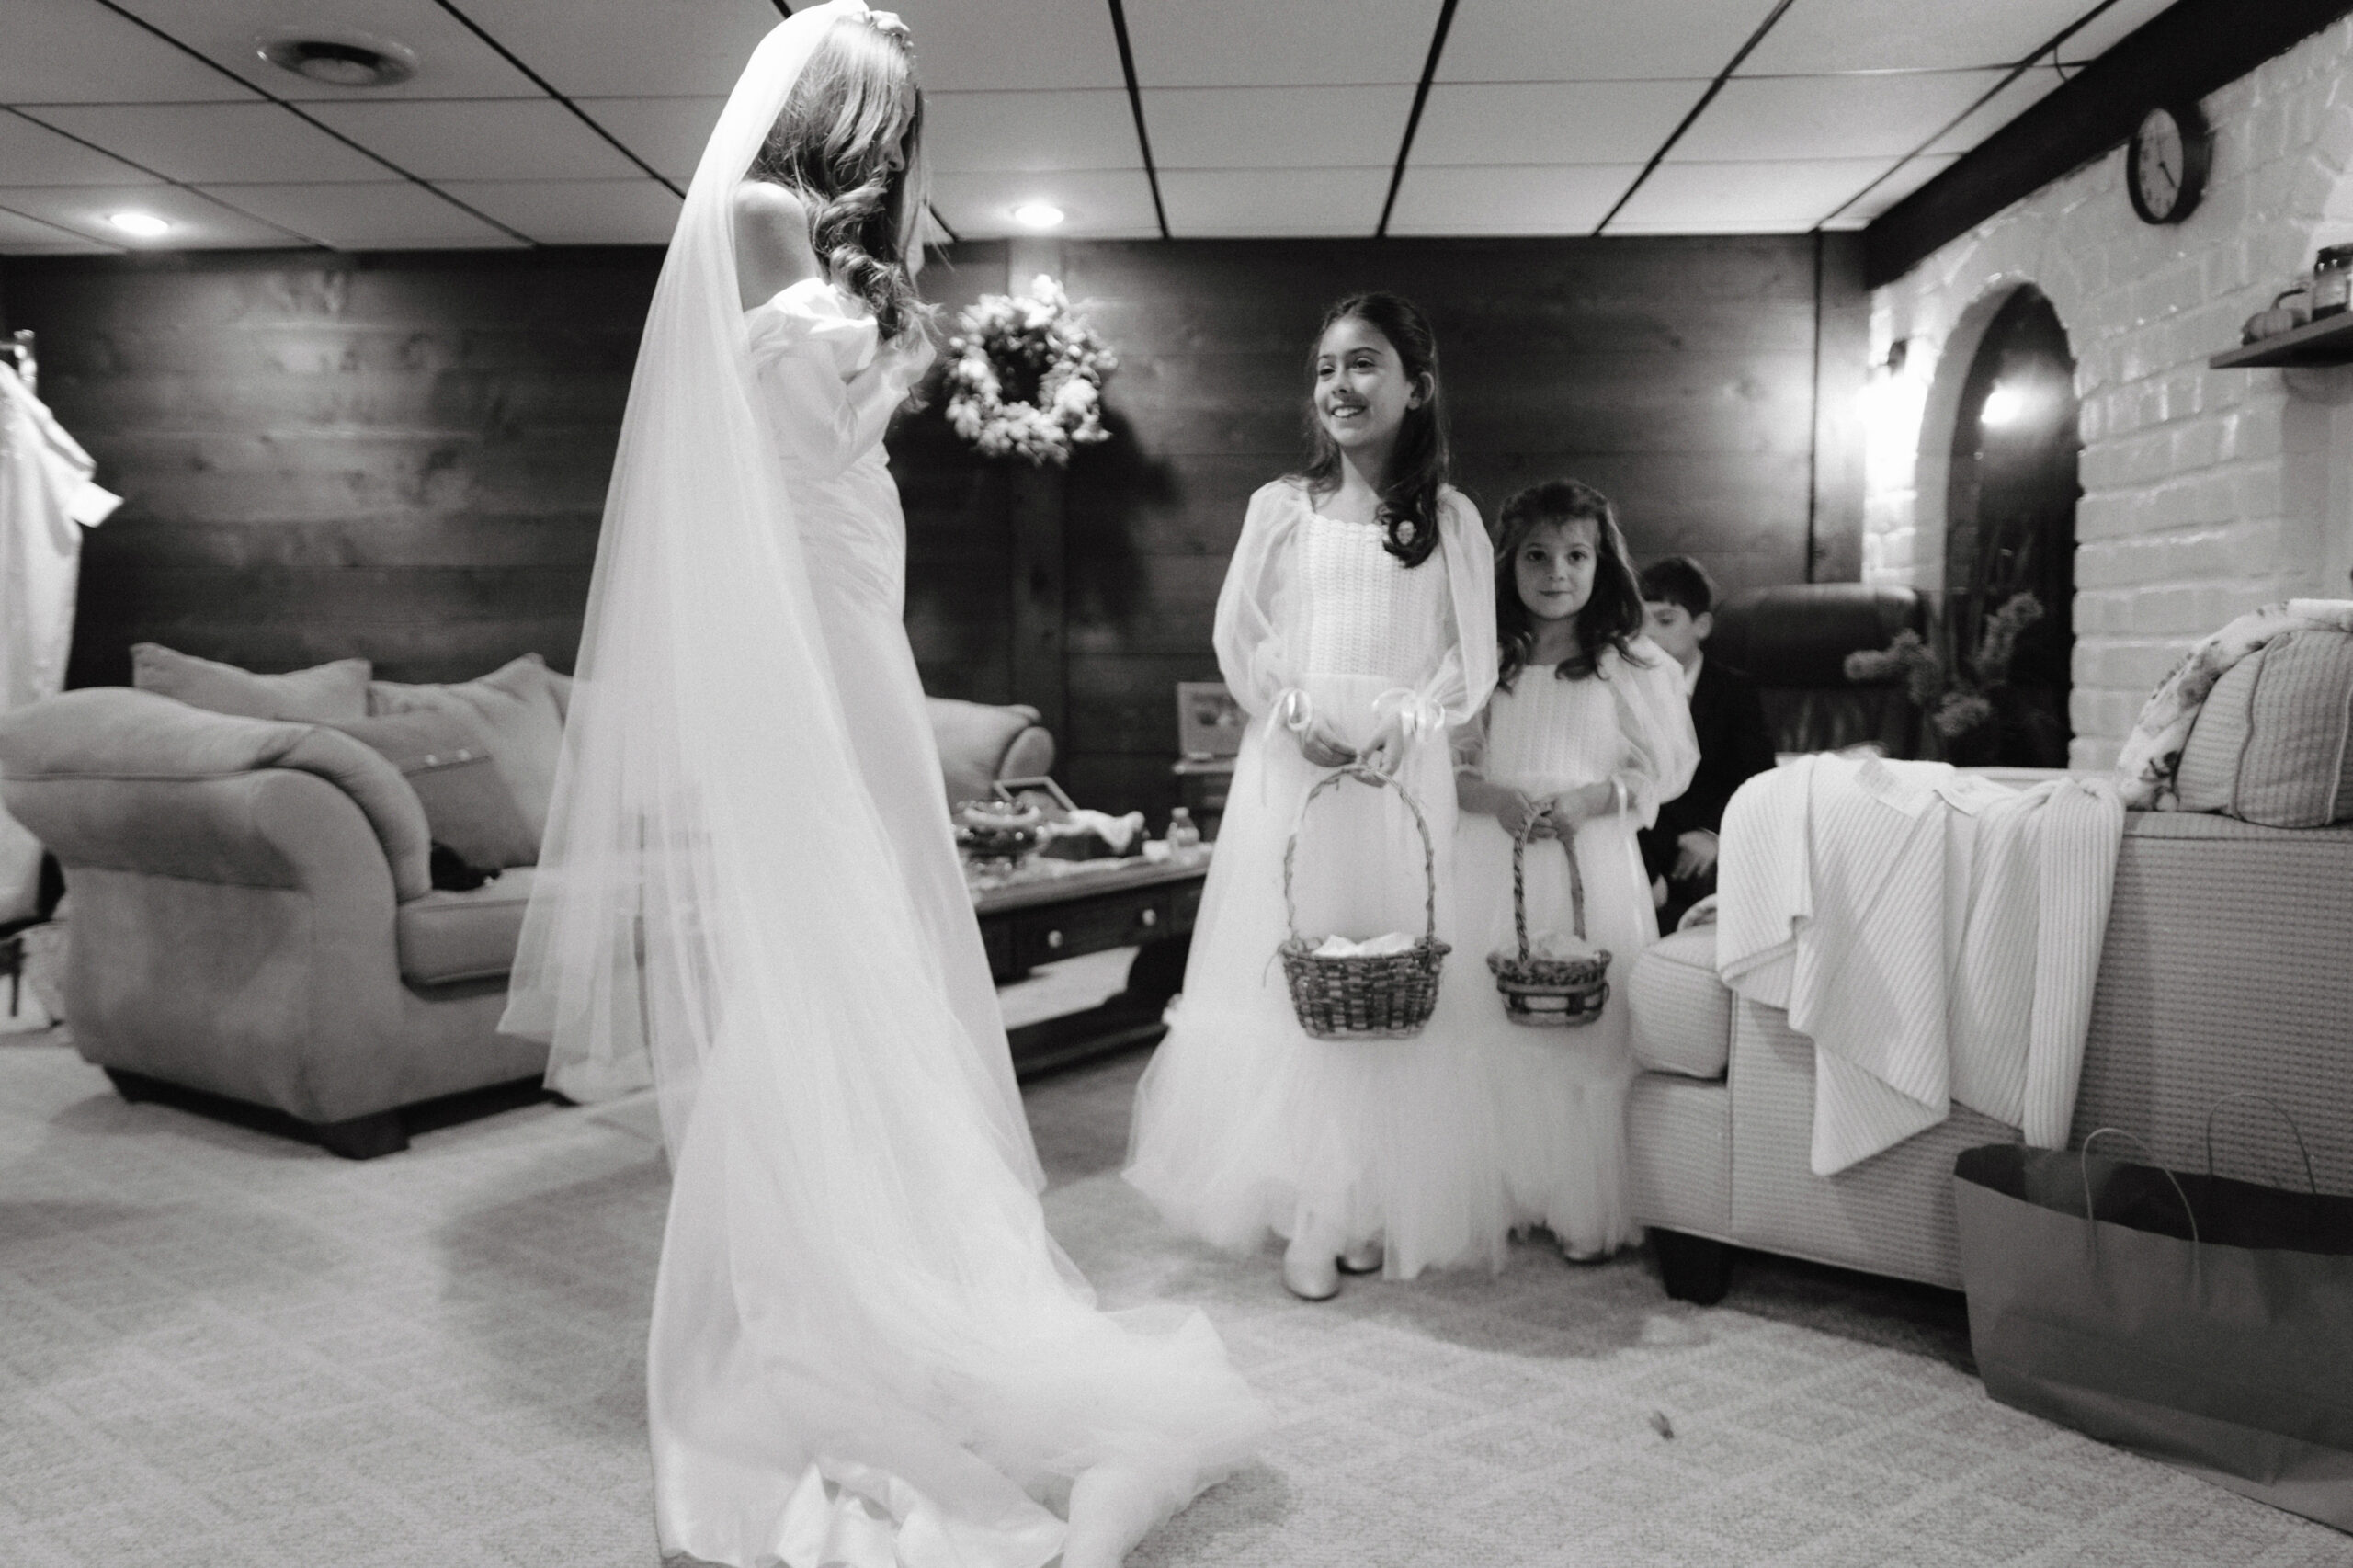 Black and white getting ready photo of the bride with her flower girls. Candid wedding photography image by Jenny Fu Studio